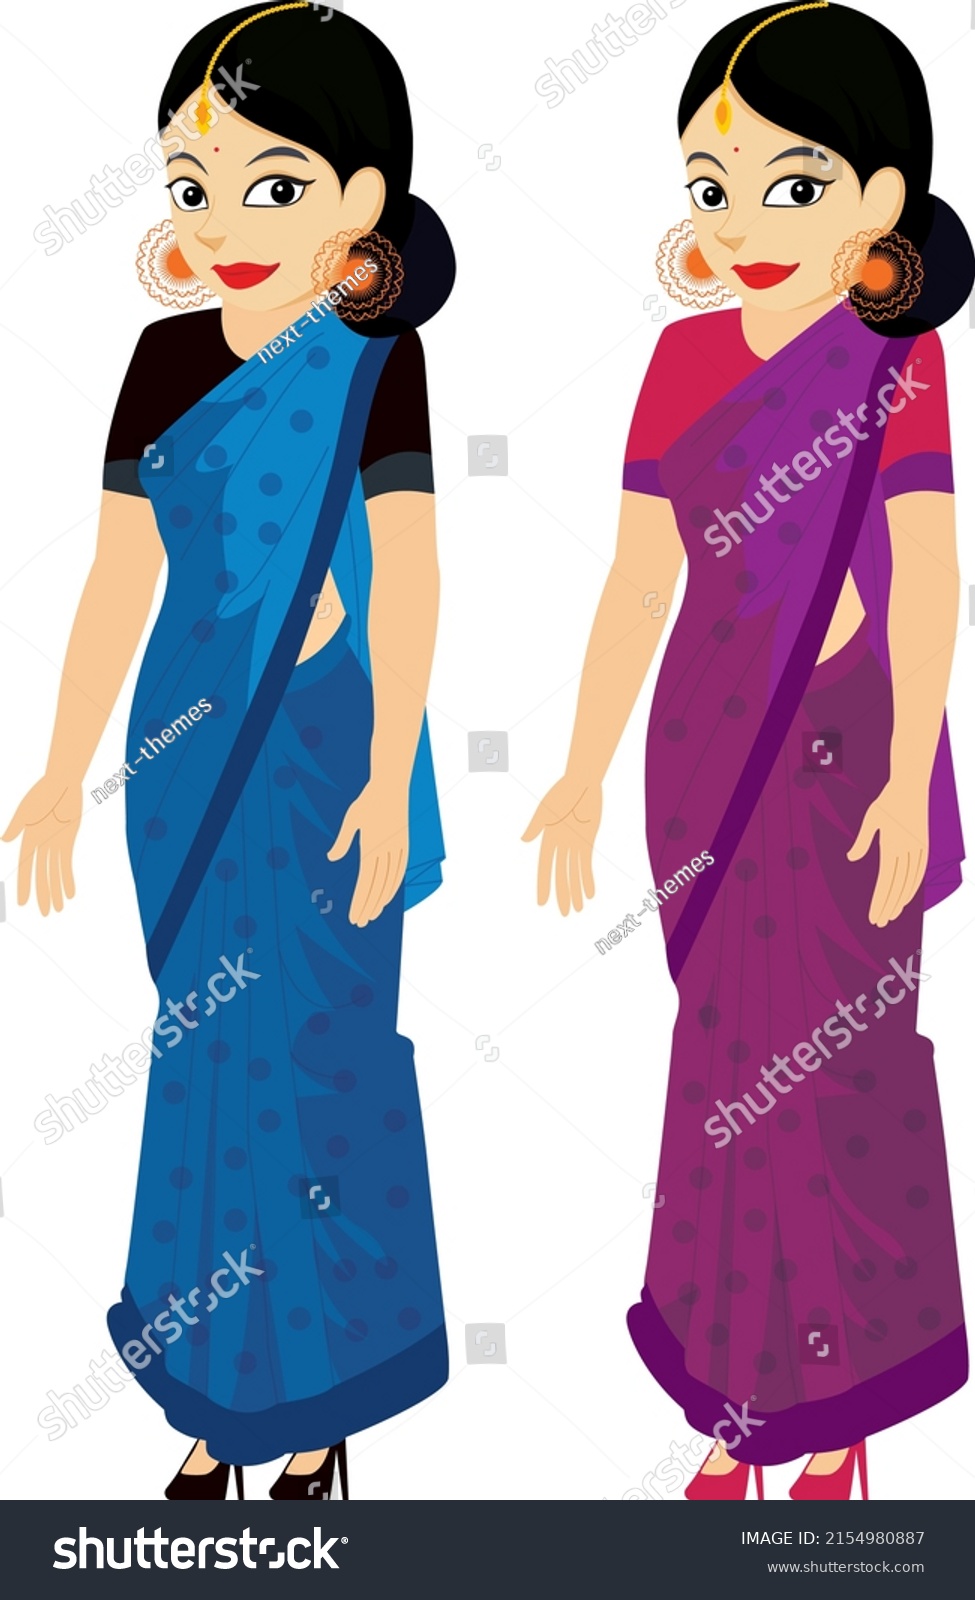 Indian Girl Character Design Model Sheet with - Royalty Free Stock ...